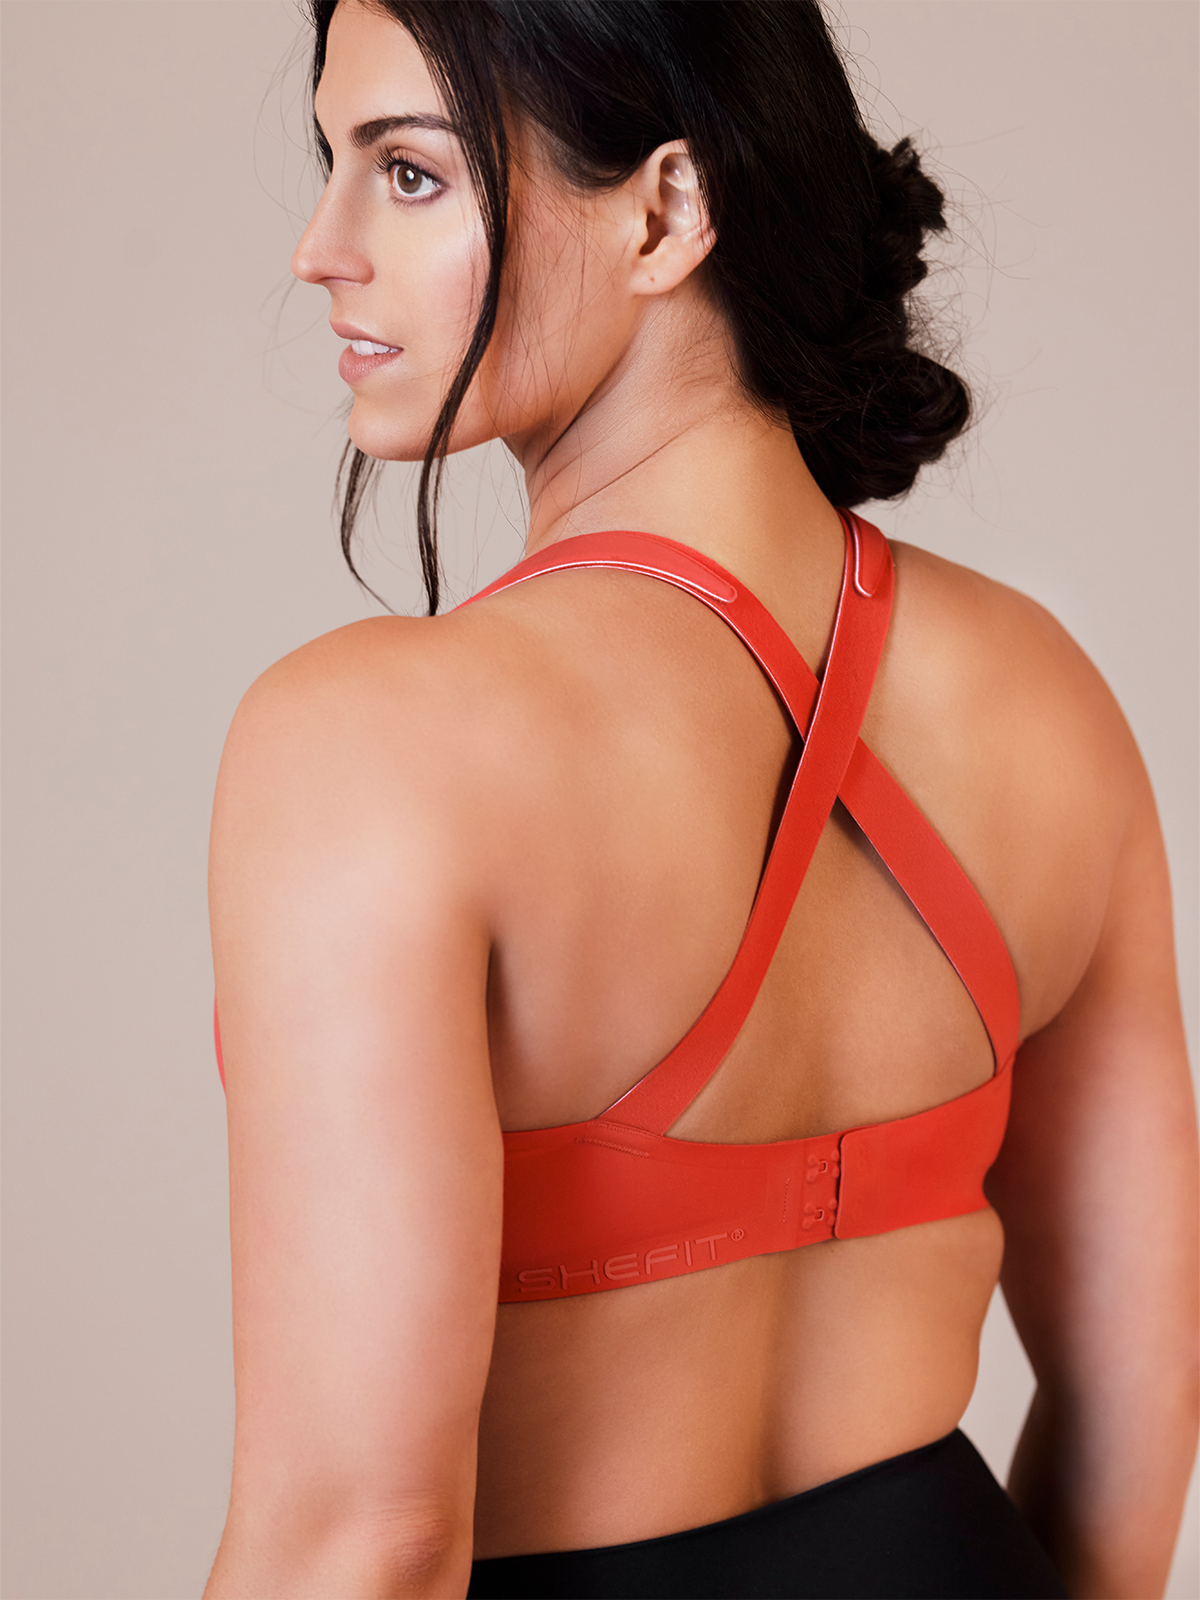 SHEFIT® on X: Lights, camera, action! SHEFIT's newest color in our Ultimate  Sports Bra: Viva Magenta launch day is officially here. The Shefit Ultimate  Sports Bra is known for no bounce and